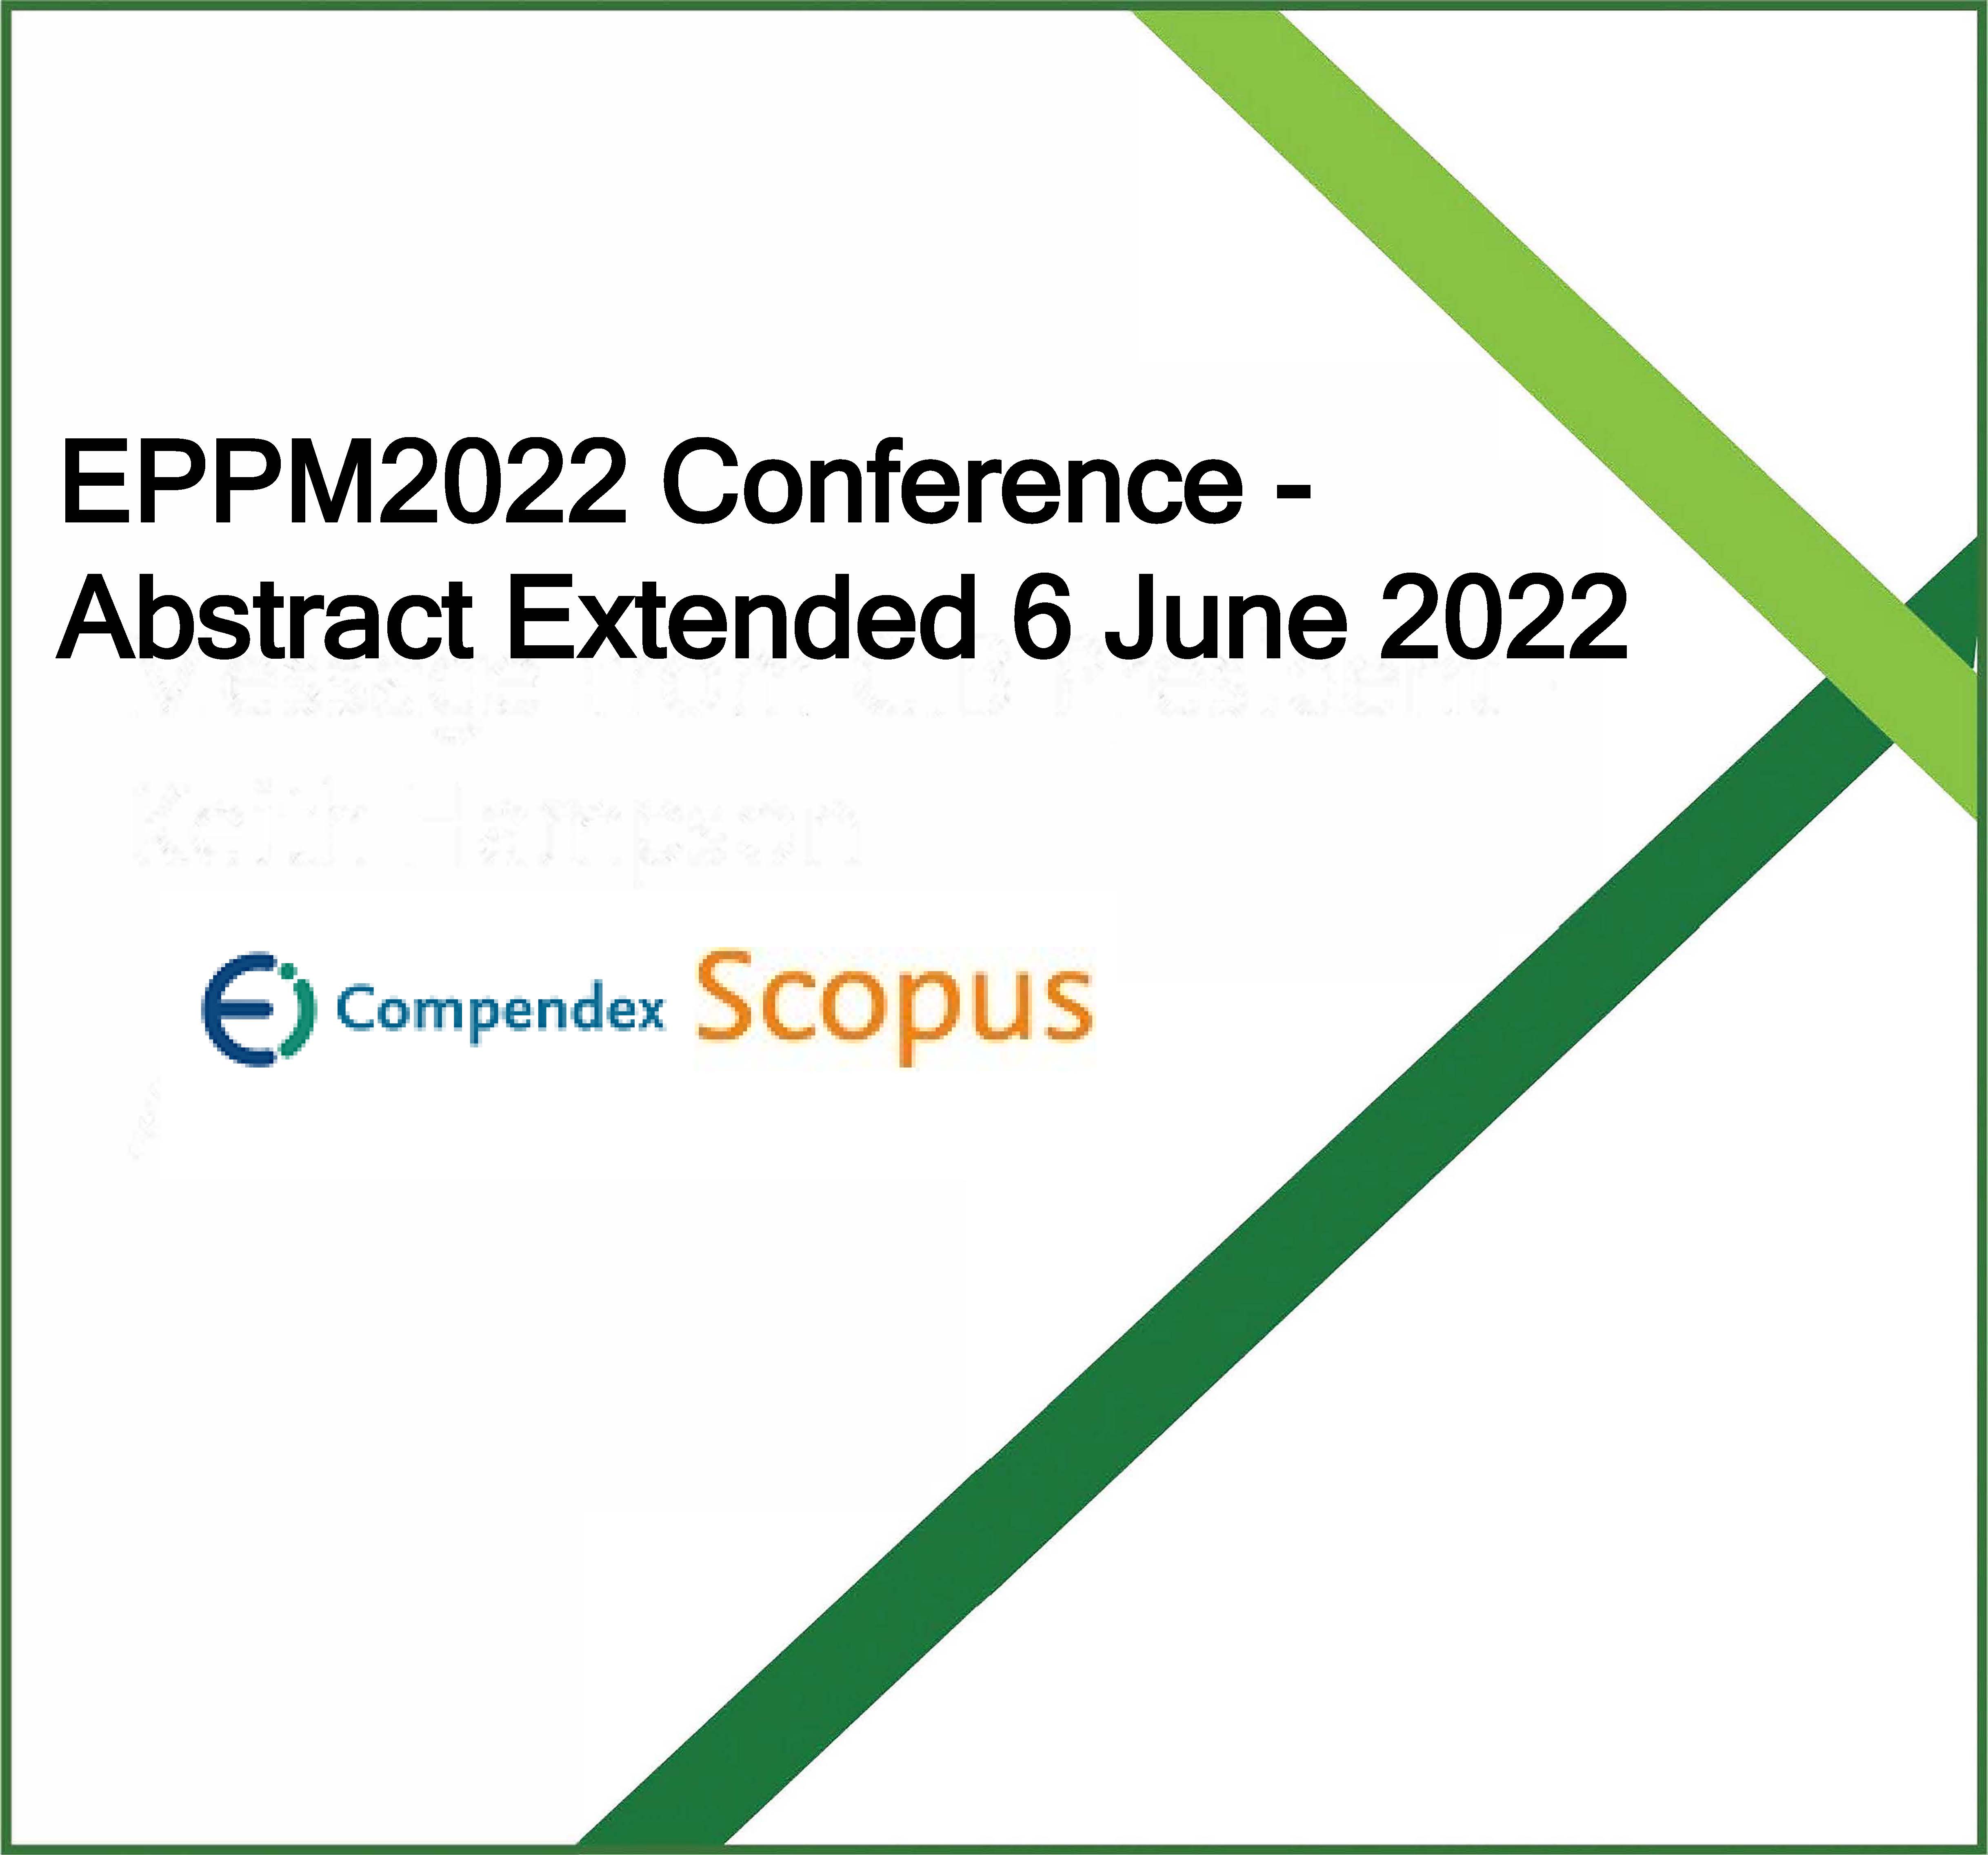 EPPM2022 Conference, 12-14 October 2022, Athens, Greece – Abstract submission Extended